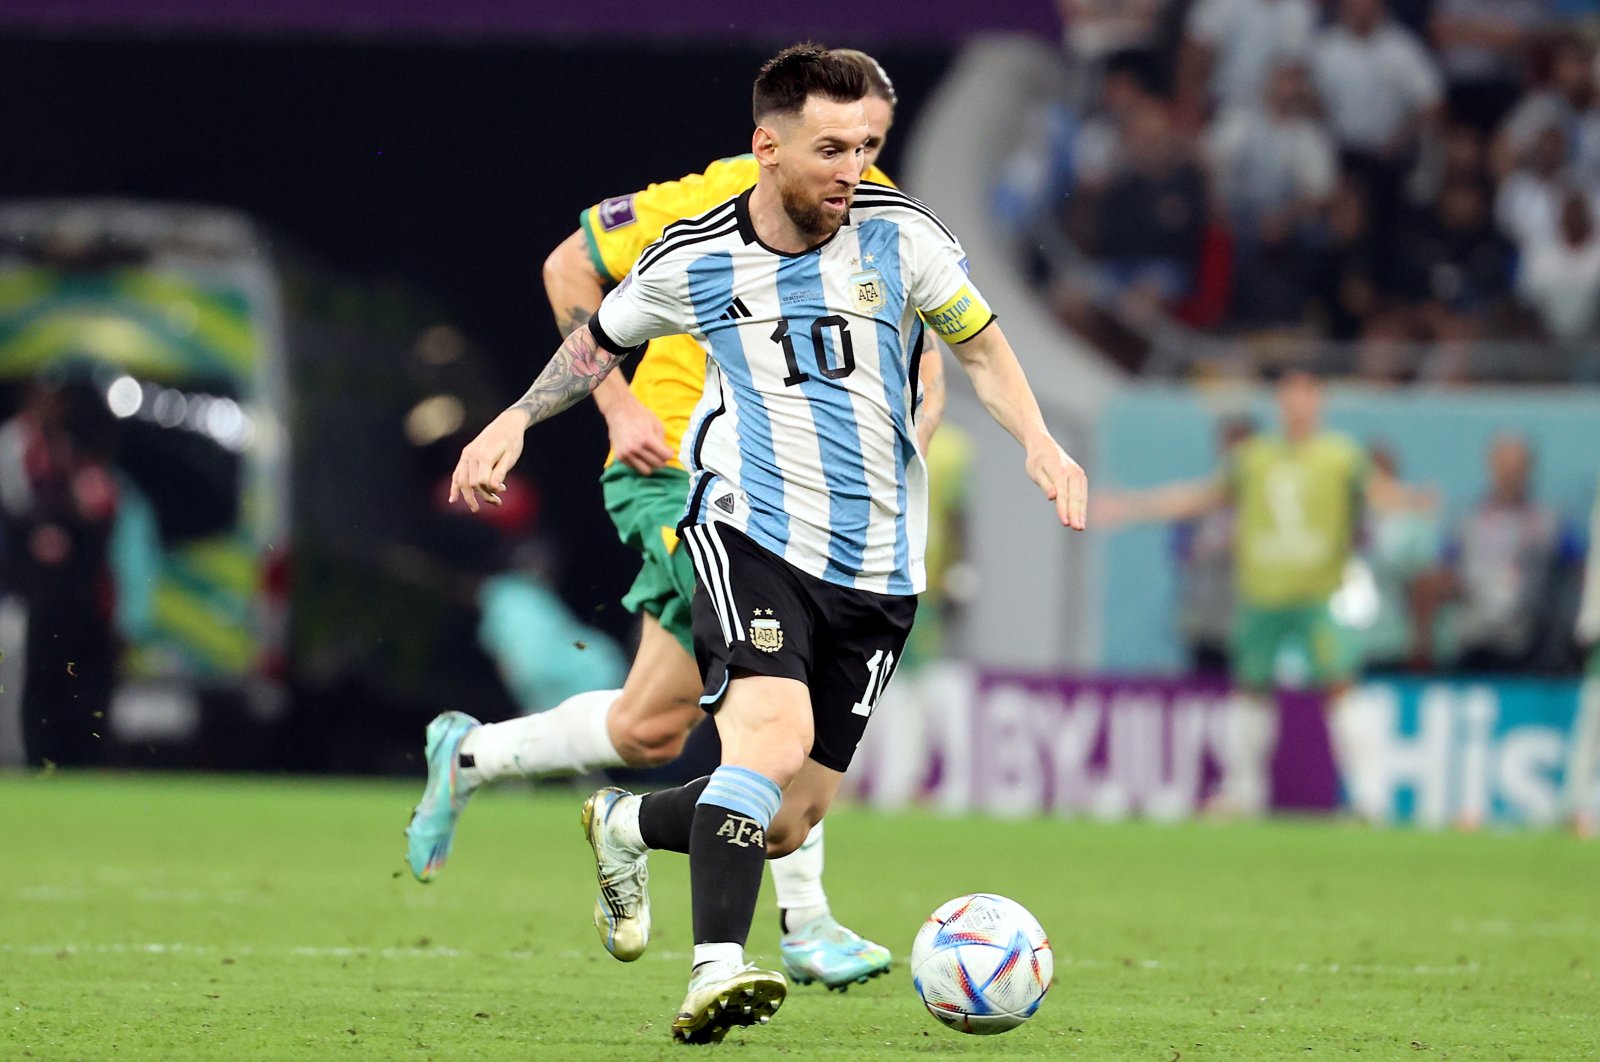 Lionel Messi of Argentina in action during the FIFA World Cup 2022 round of 16 football match between Argentina and Australia at Ahmad bin Ali Stadium, Doha, Qatar, Dec. 3, 2022. (EPA Photo)